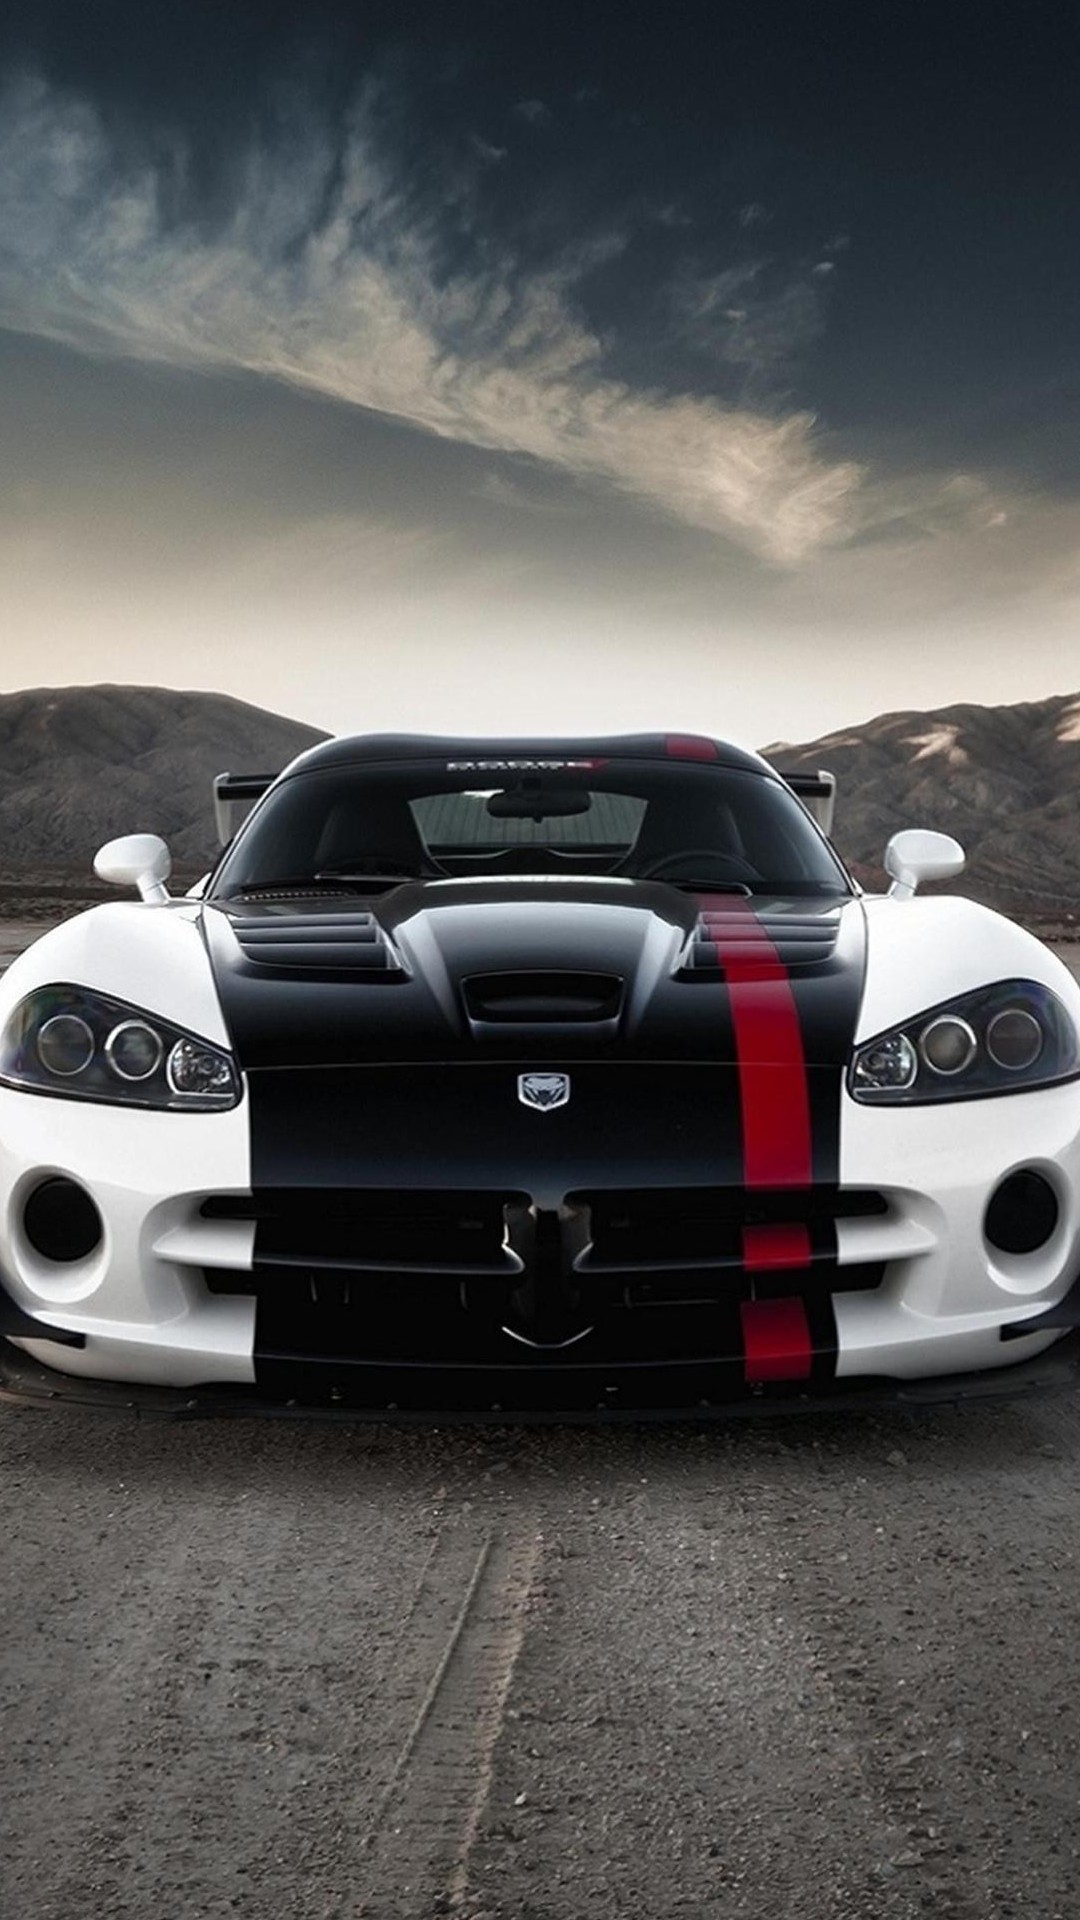 82 Awesome Llg car wallpaper for iPad Wallpaper